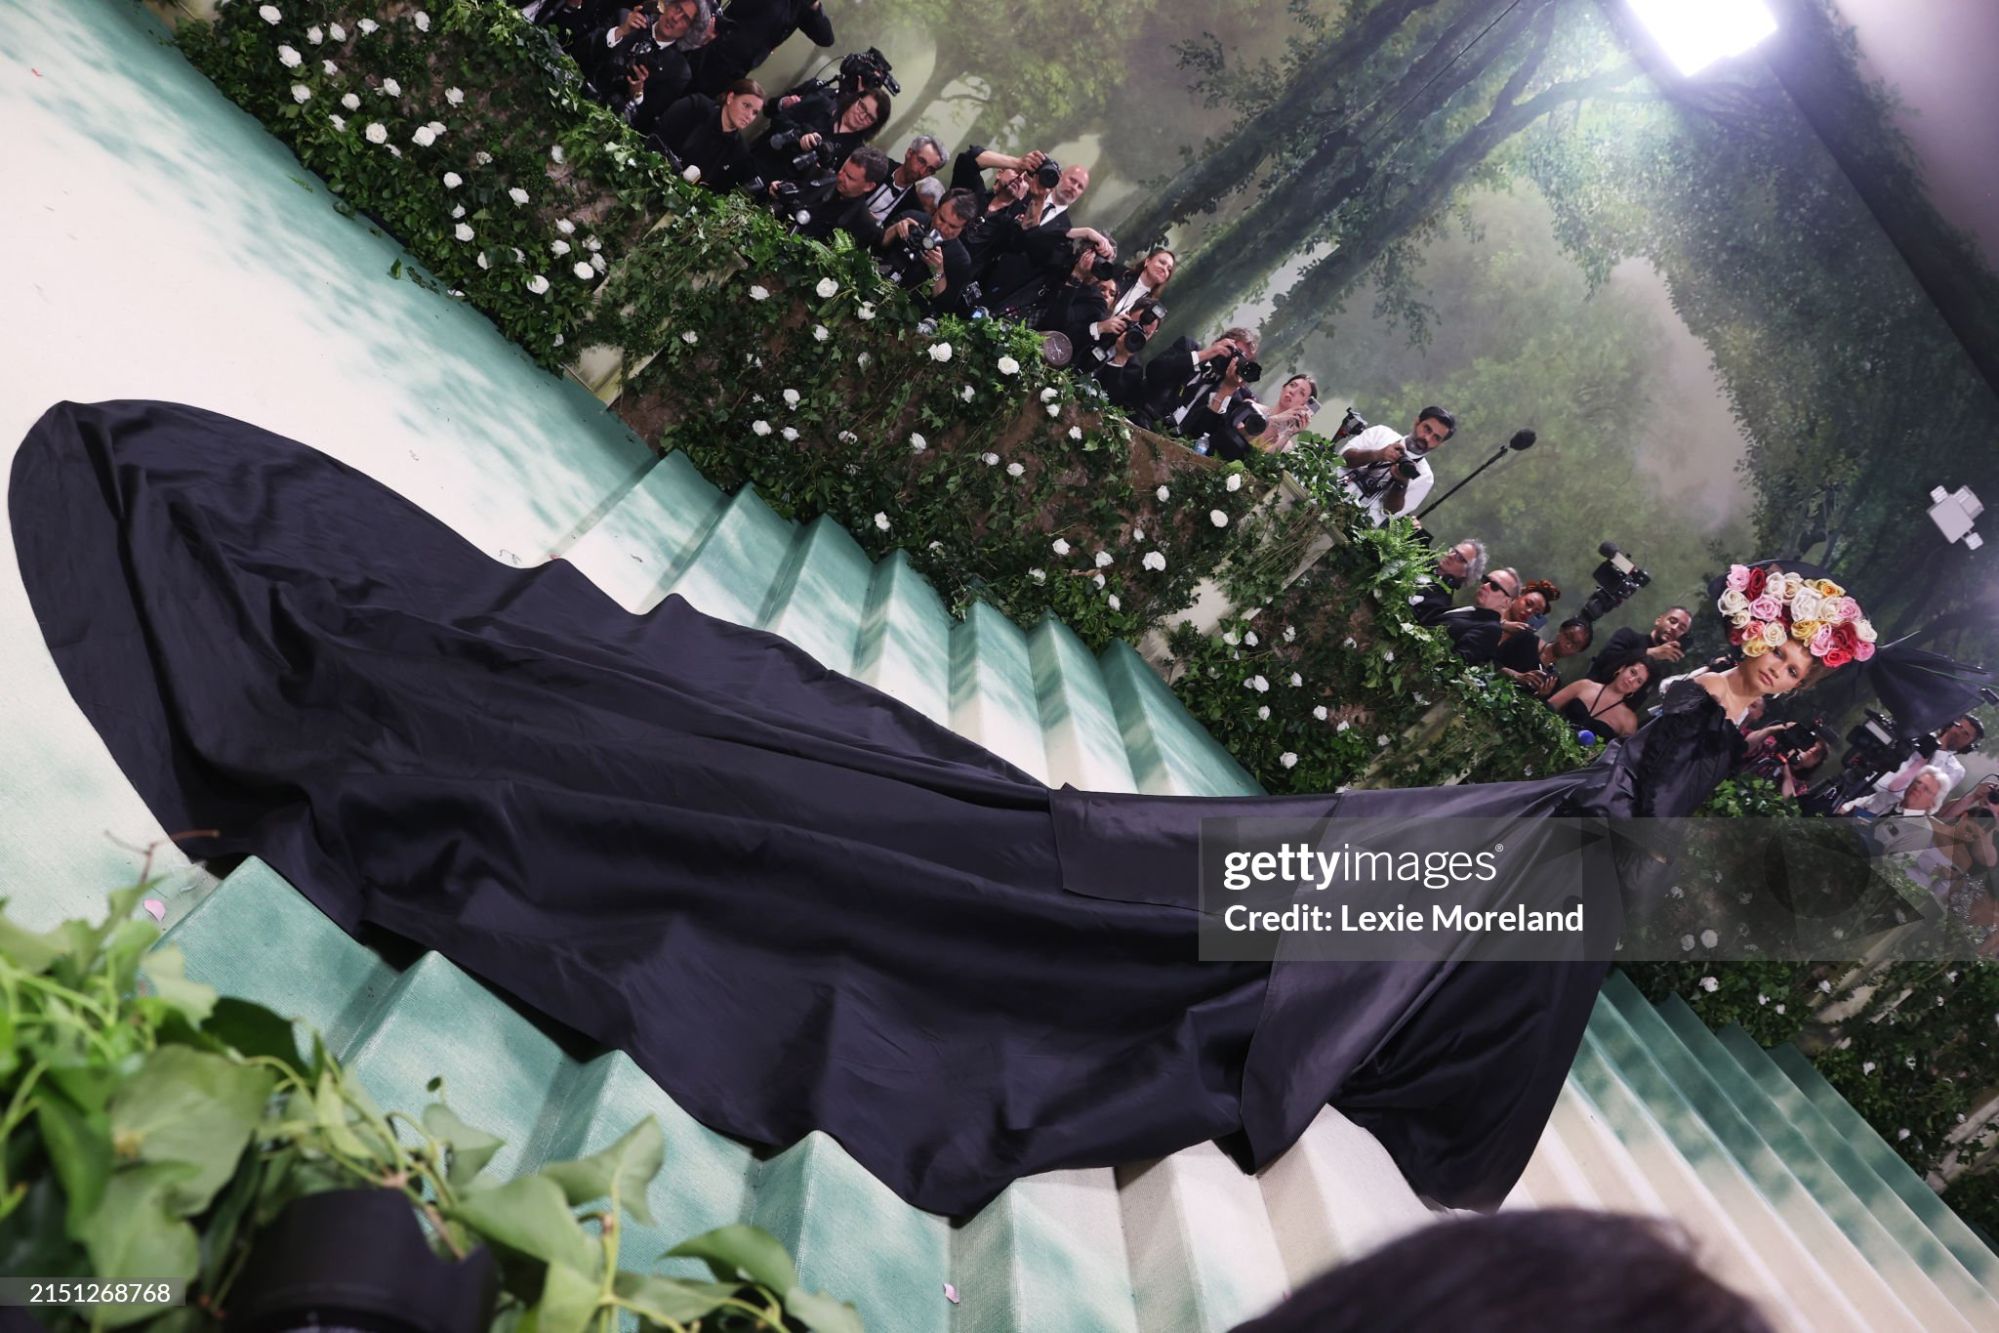 gettyimages-2151268768-2048x2048.jpg